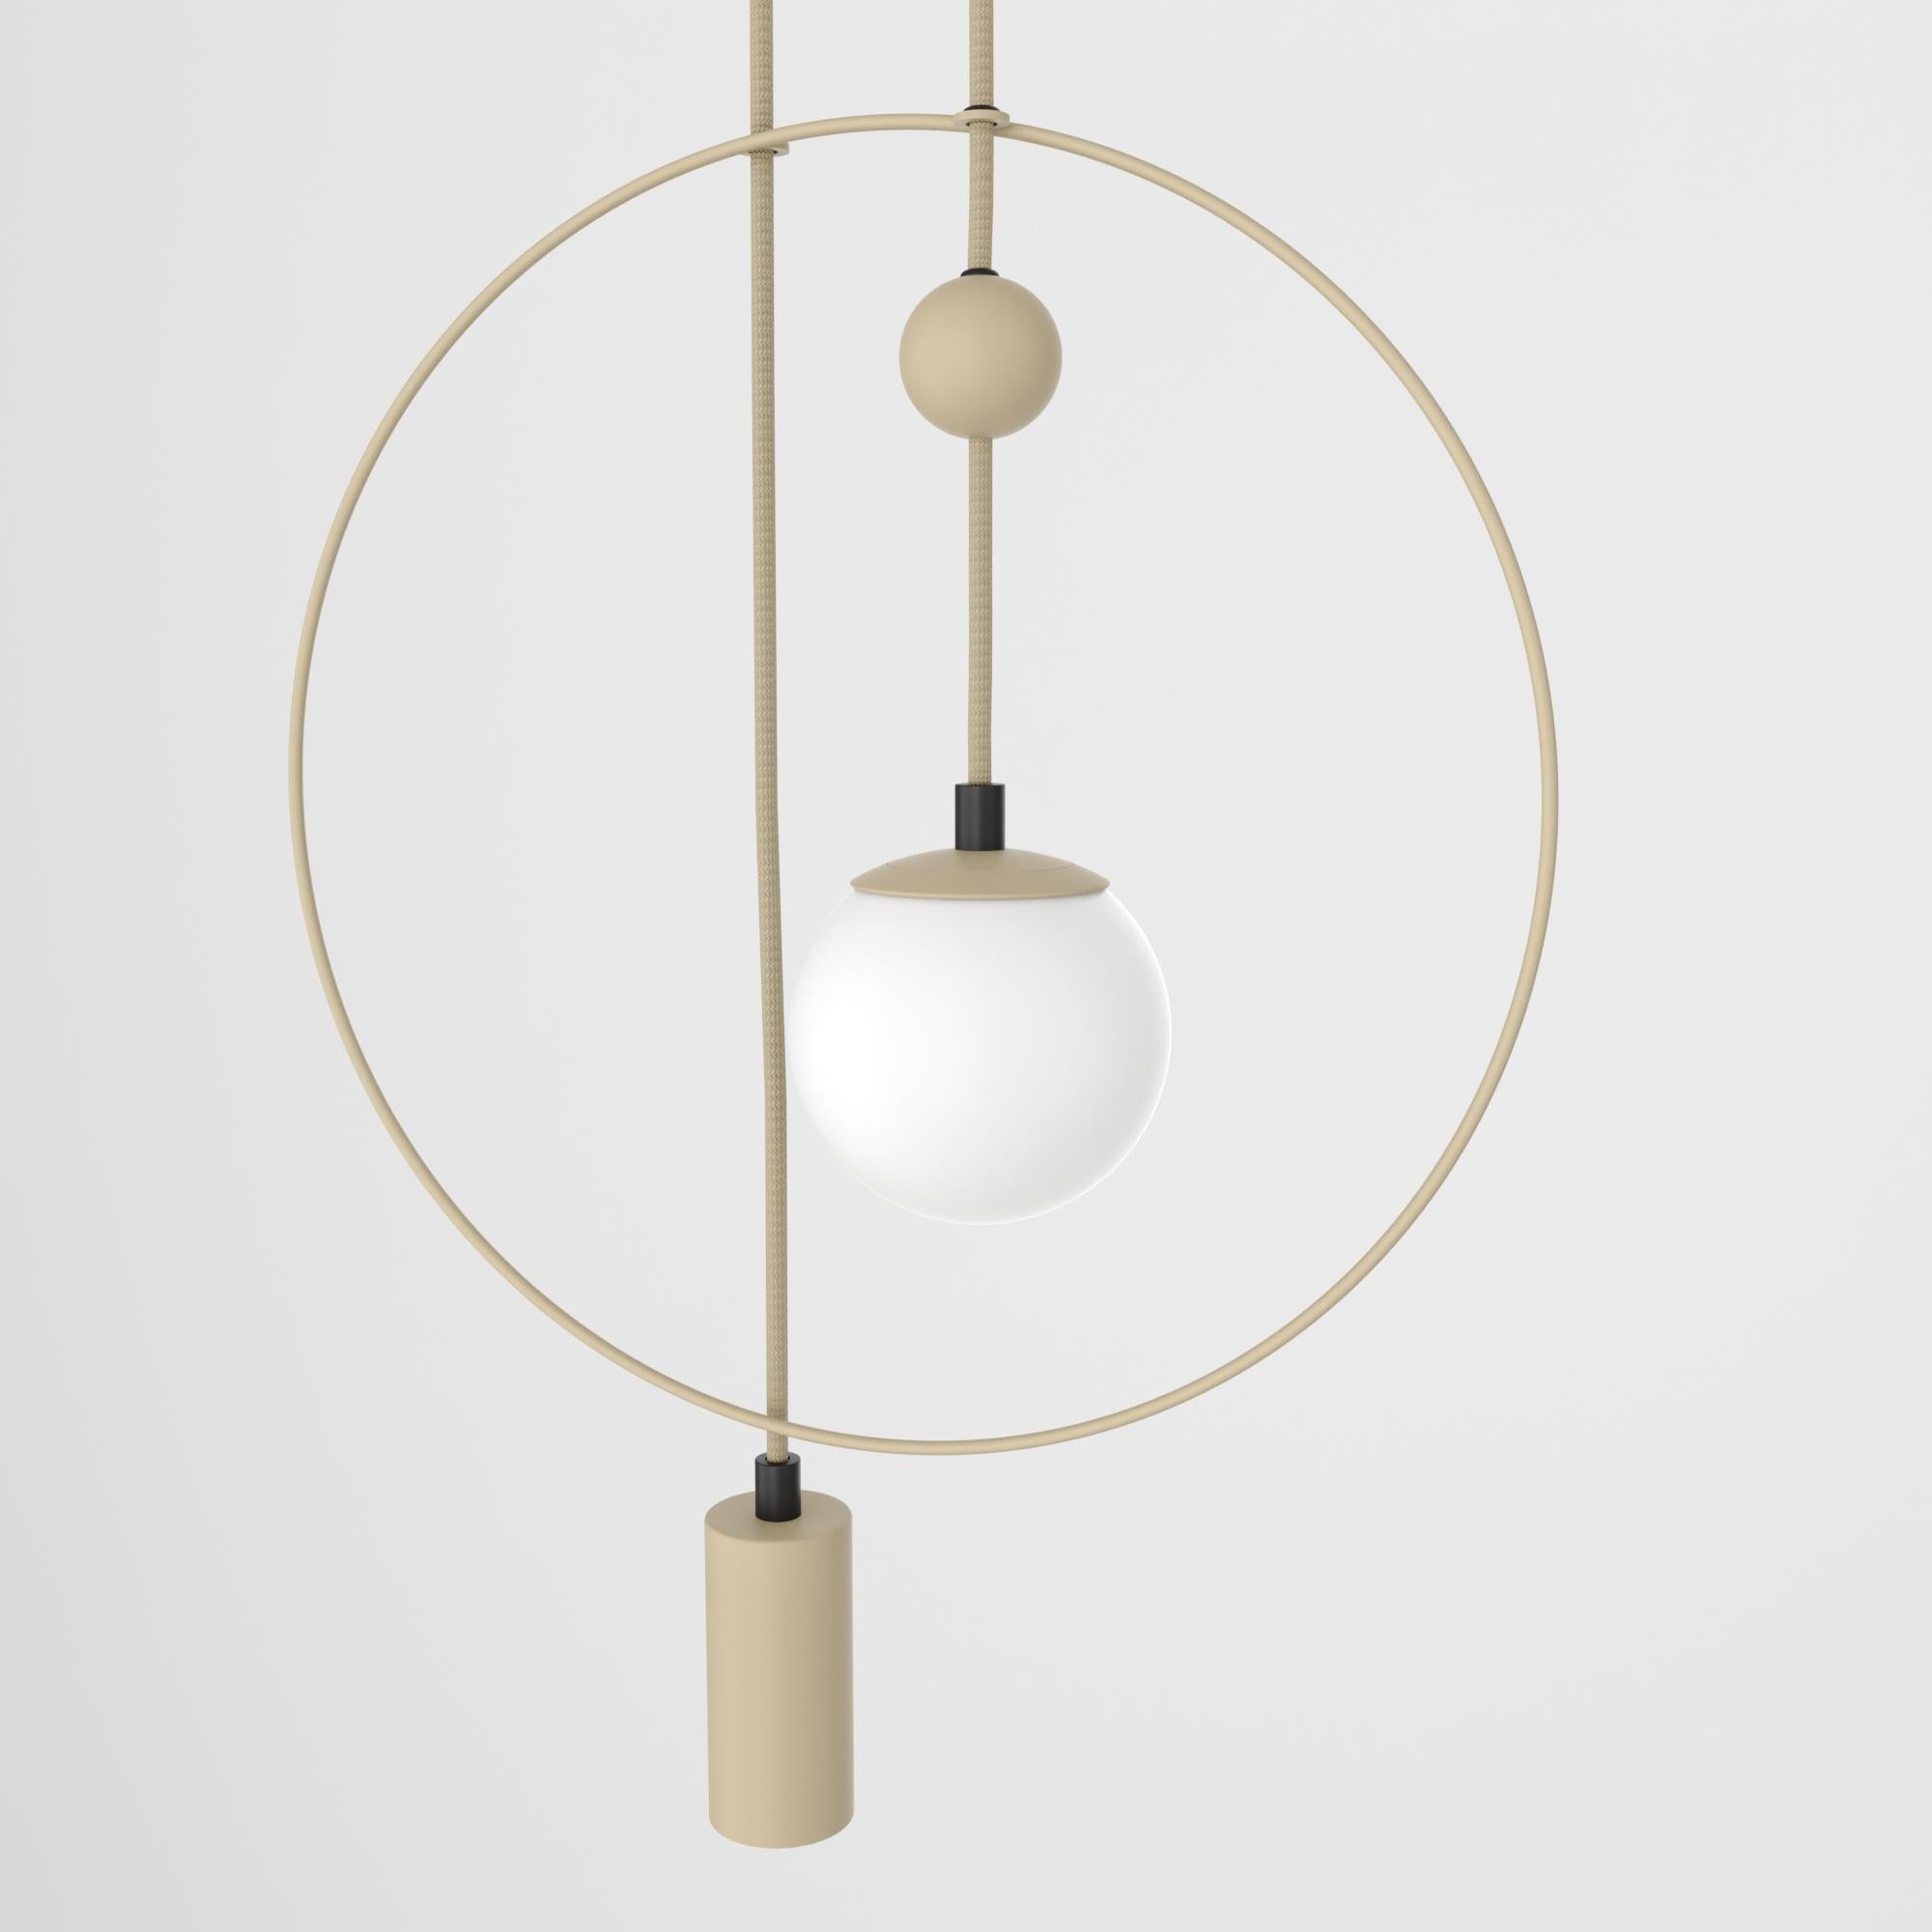 Sunderline CB (glass sphere + cylinder)

Category: lighting
Type: pendant, chandelier
Material: steel, frosted glass, textile cable
Overall dimensions: H: 2100 mm / W: 400 mm
Light source: E14 and G9, 110-220V
Available in different colors